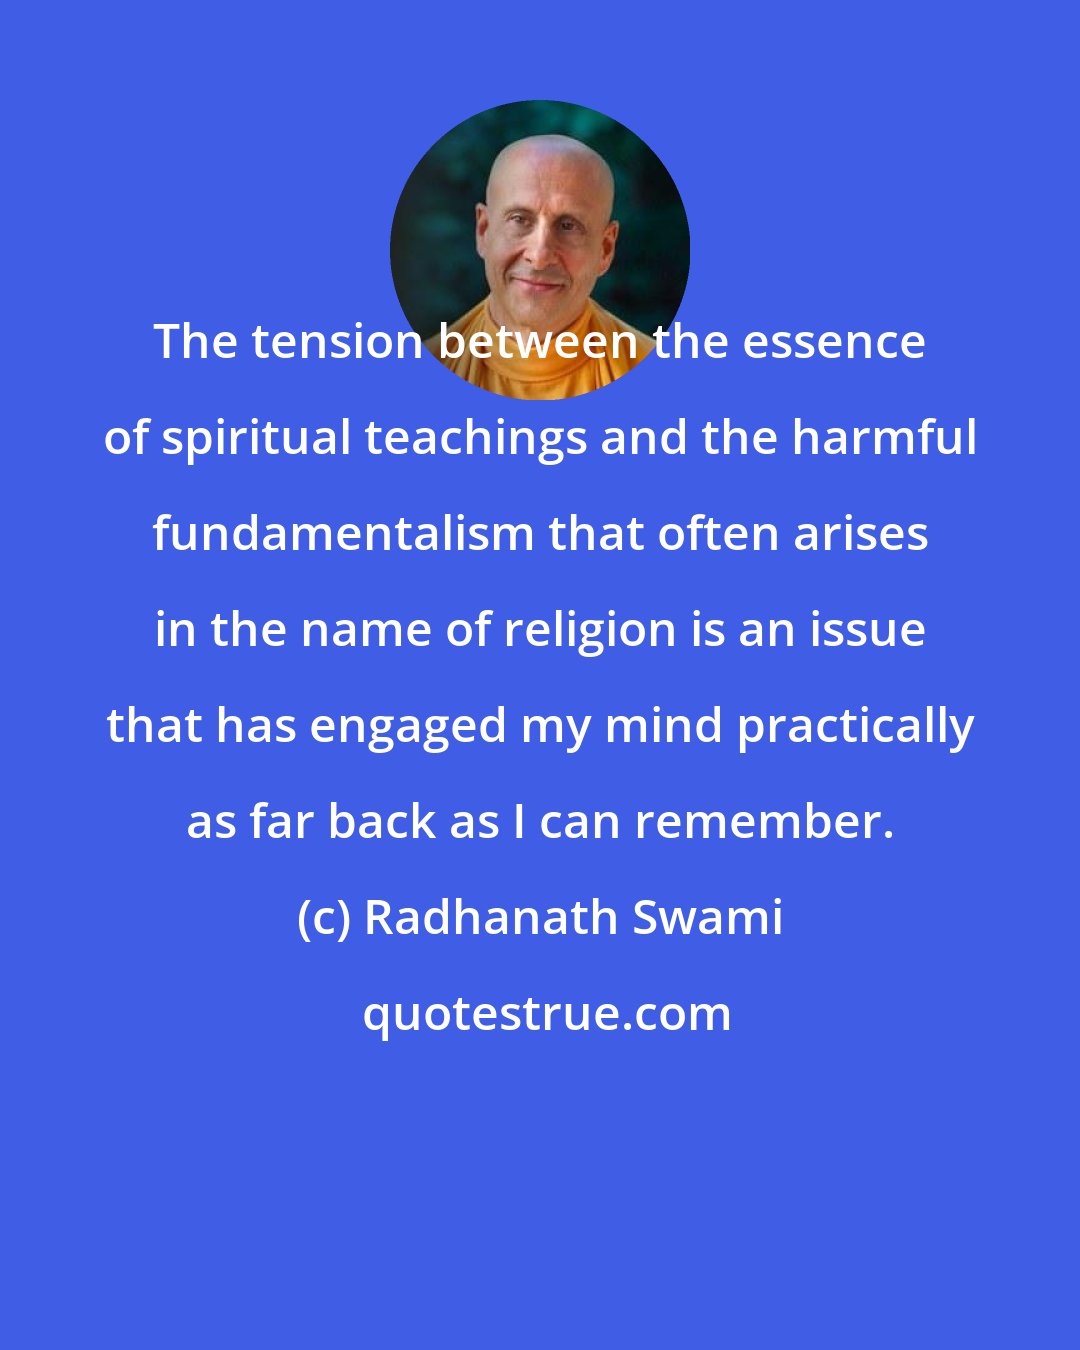 Radhanath Swami: The tension between the essence of spiritual teachings and the harmful fundamentalism that often arises in the name of religion is an issue that has engaged my mind practically as far back as I can remember.